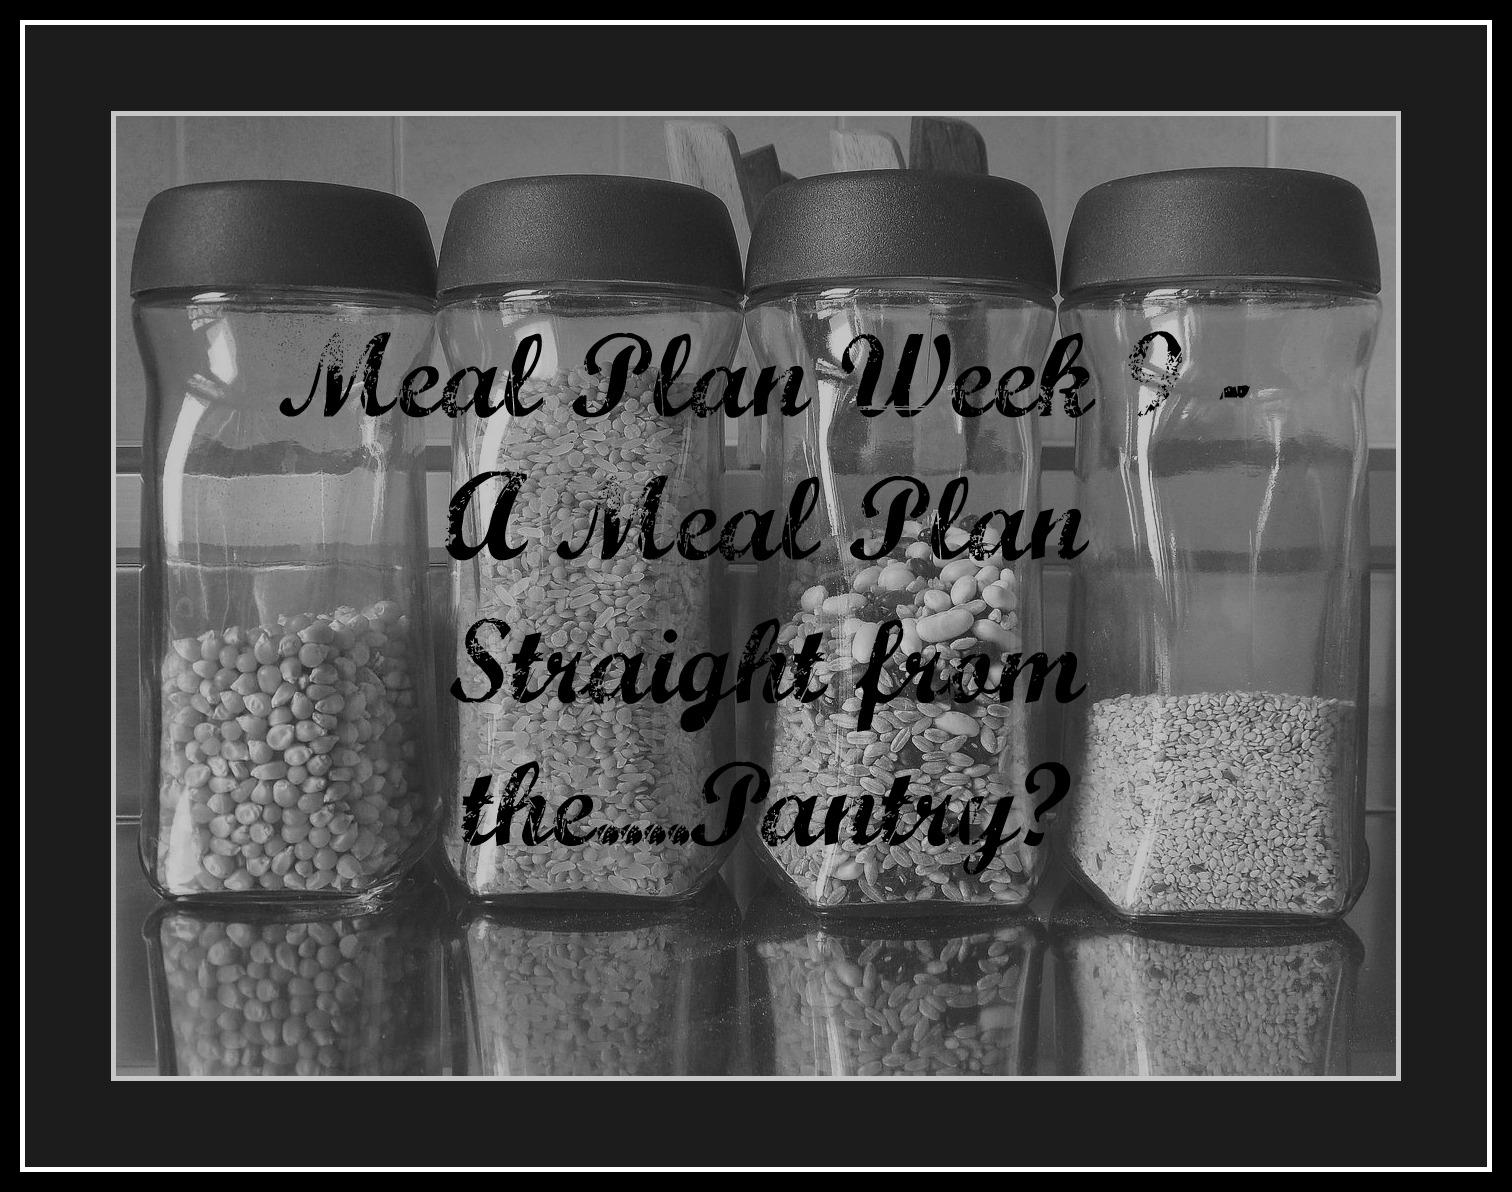 Meal Plan Week 9 - A meal Plan Straight from the Pantry